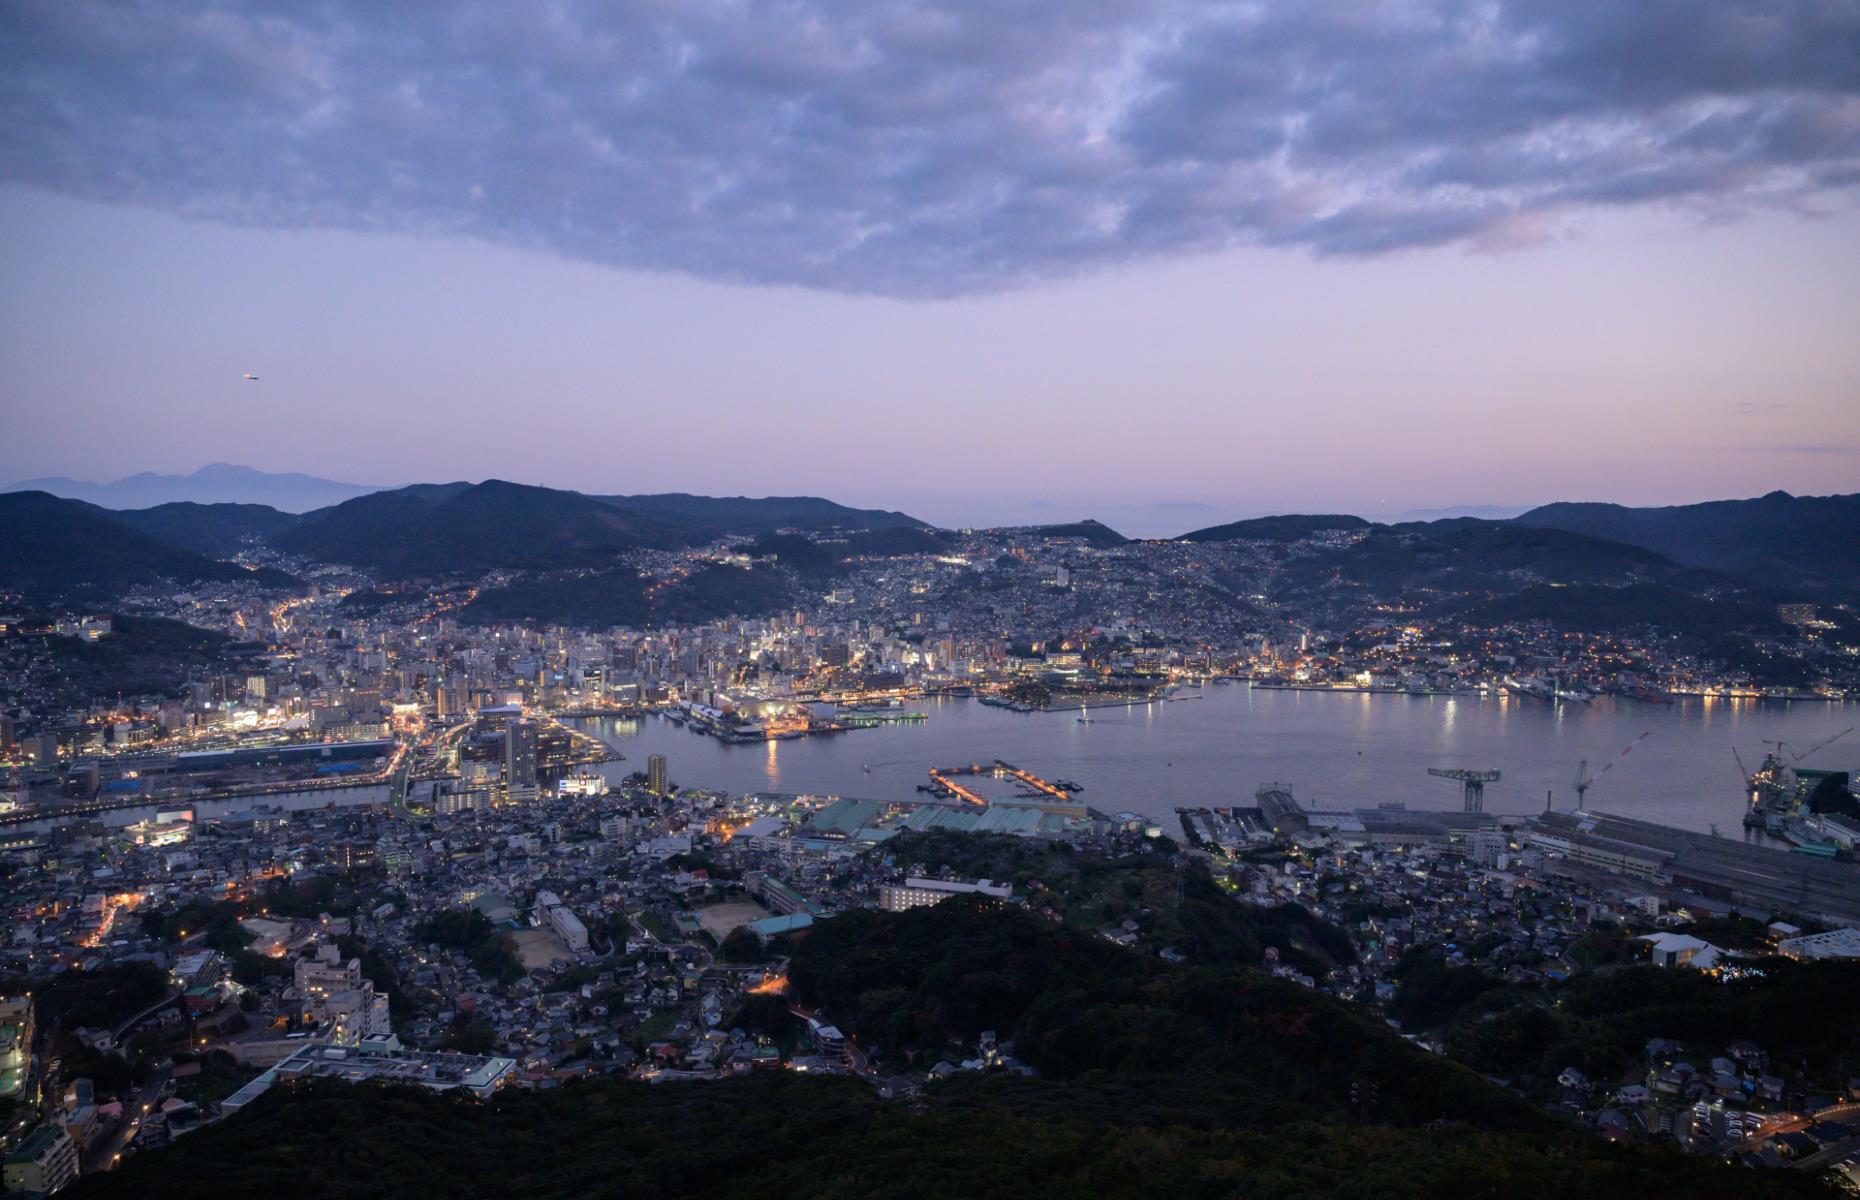 <p>With its glimmering lights and mountainous backdrop, it’s no surprise that the pretty Nagasaki Port is Japan’s second-biggest cruise destination. Lying at the head of a long bay, liners usually dock at Matsugae Wharf, which is within easy reach of a streetcar stop for exploring the city.</p>